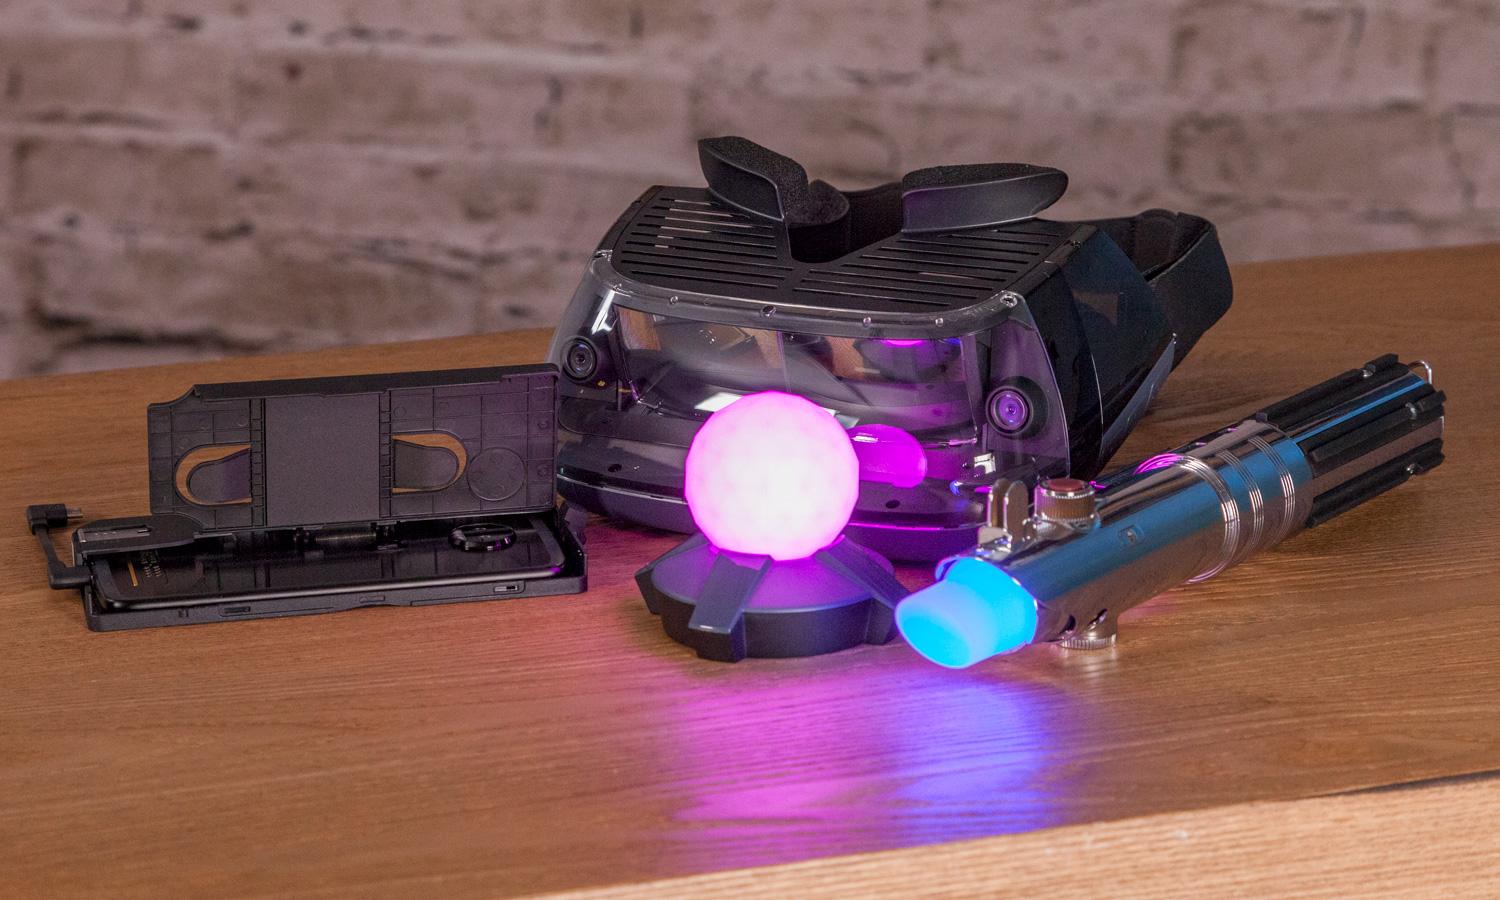 Star Wars AR Kit Just Dropped to $50